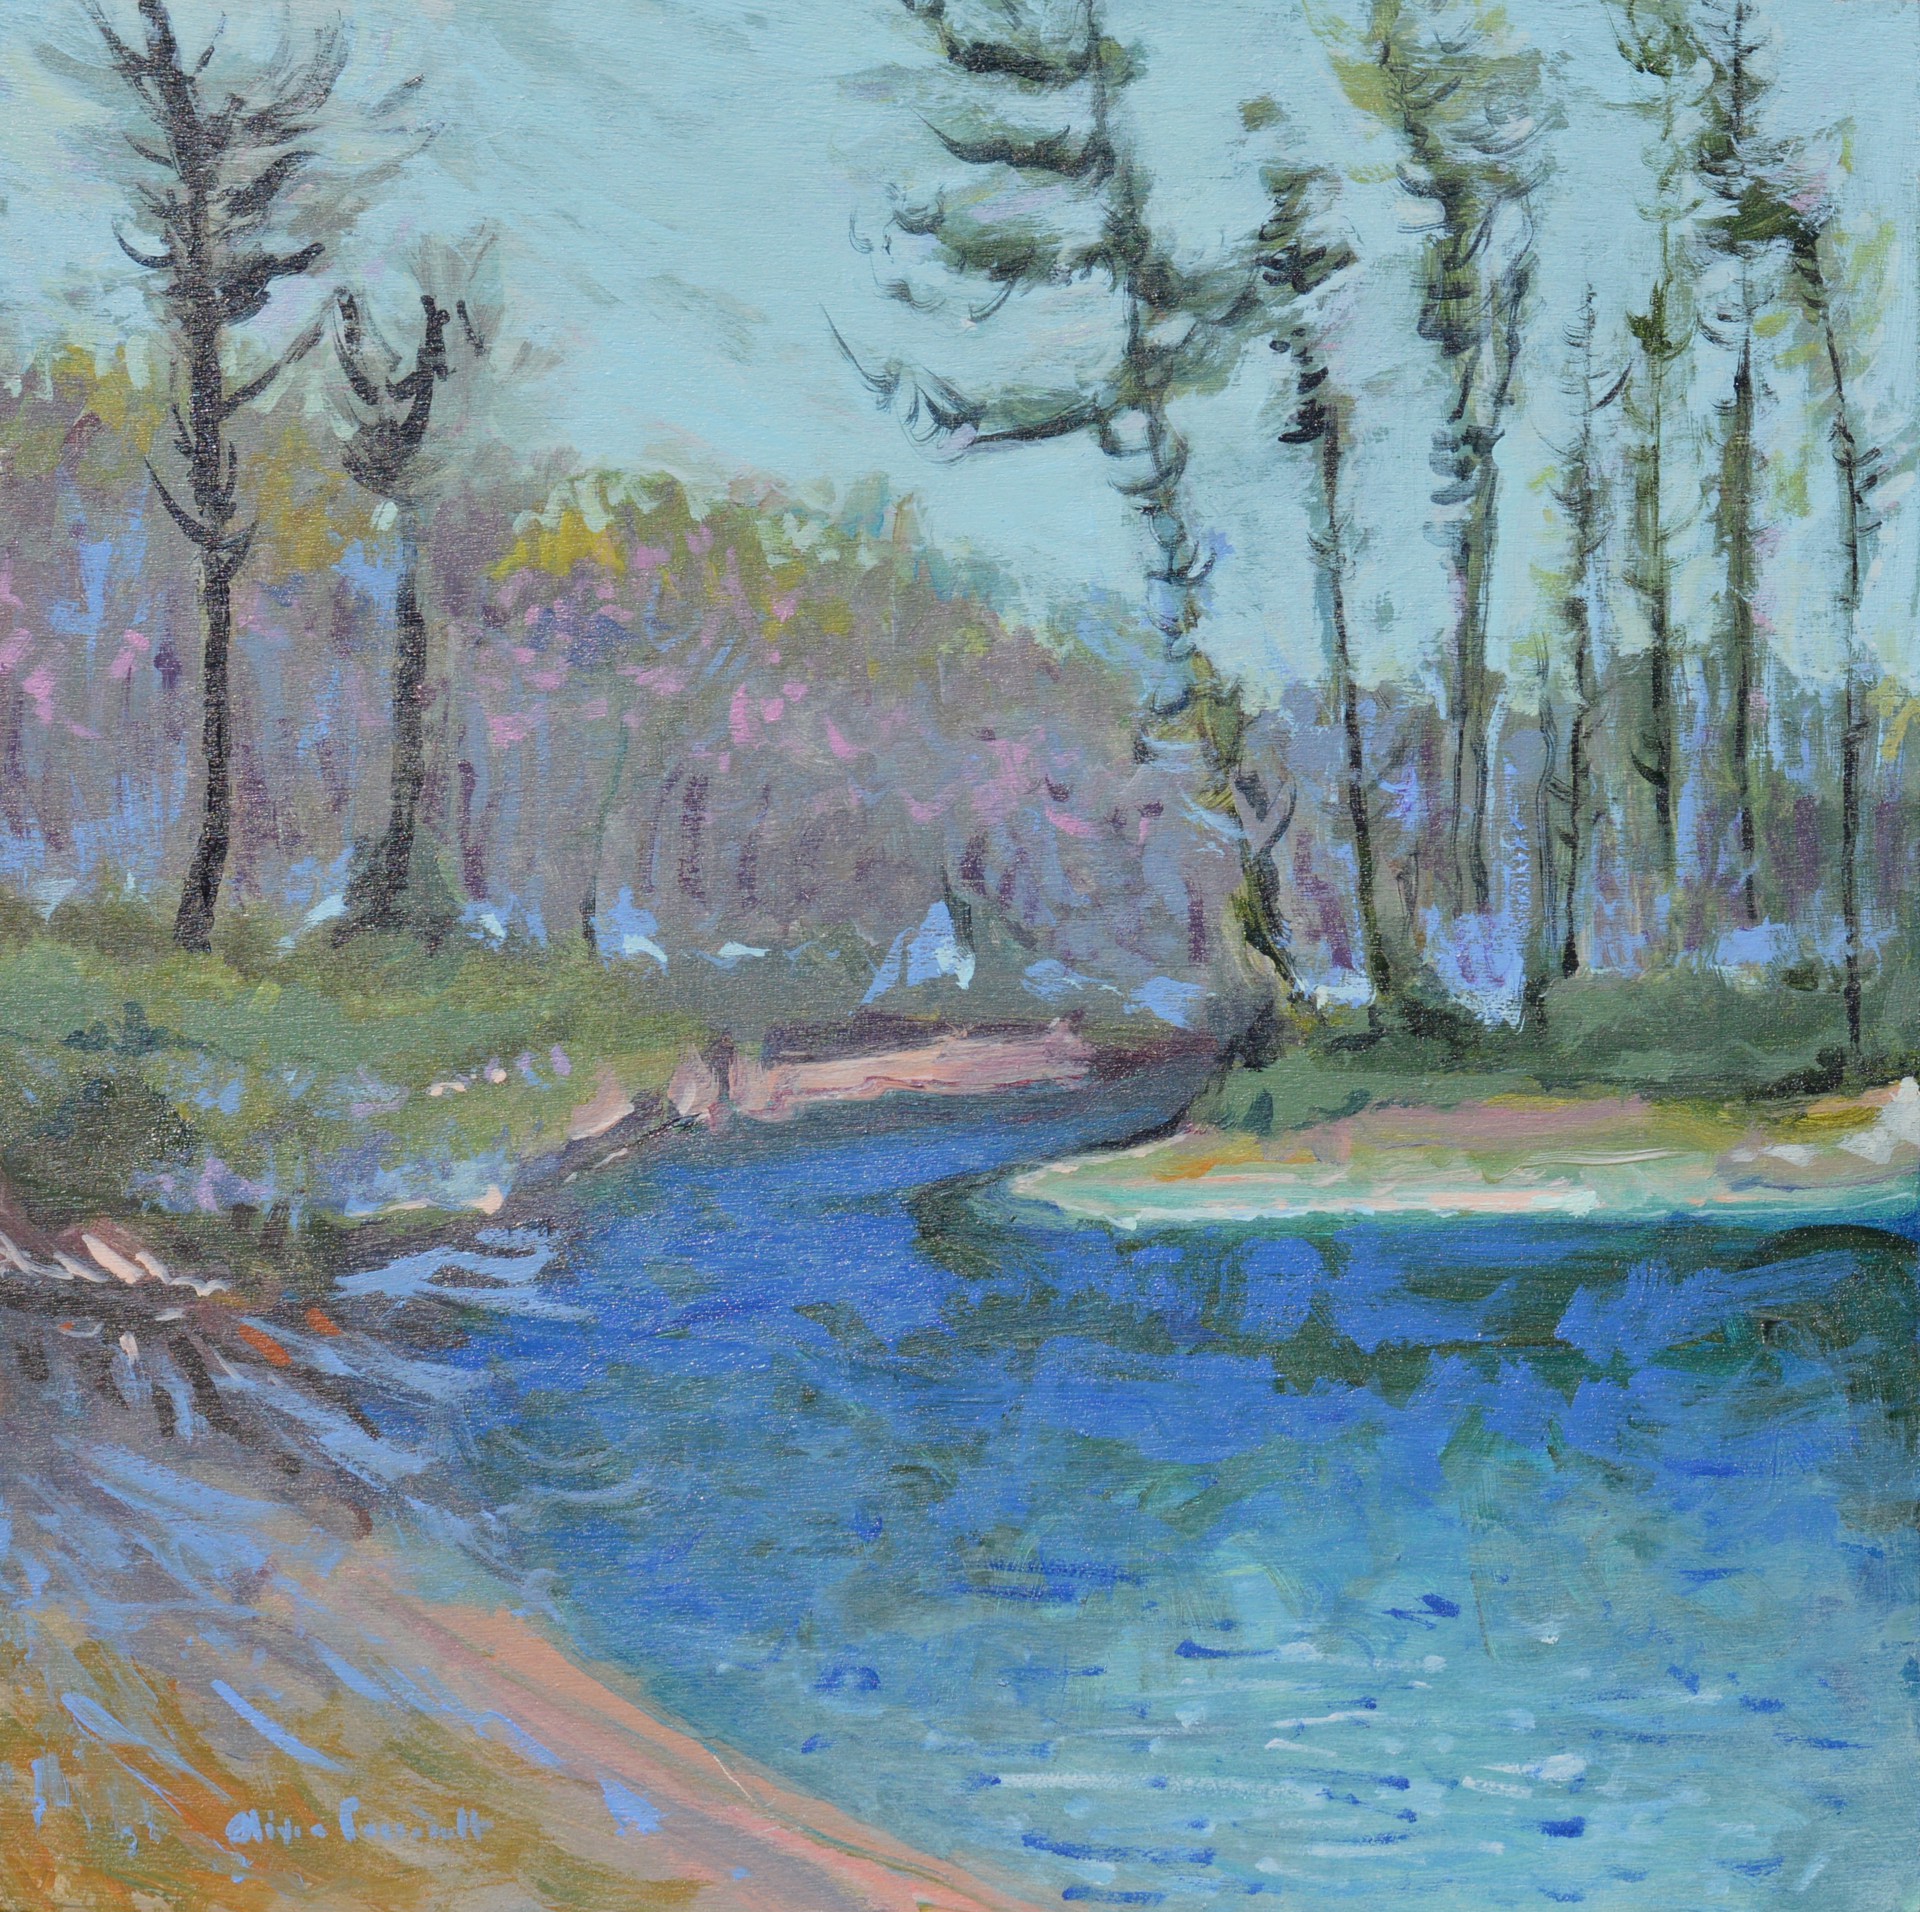 Chattooga River by Olivia Perreault